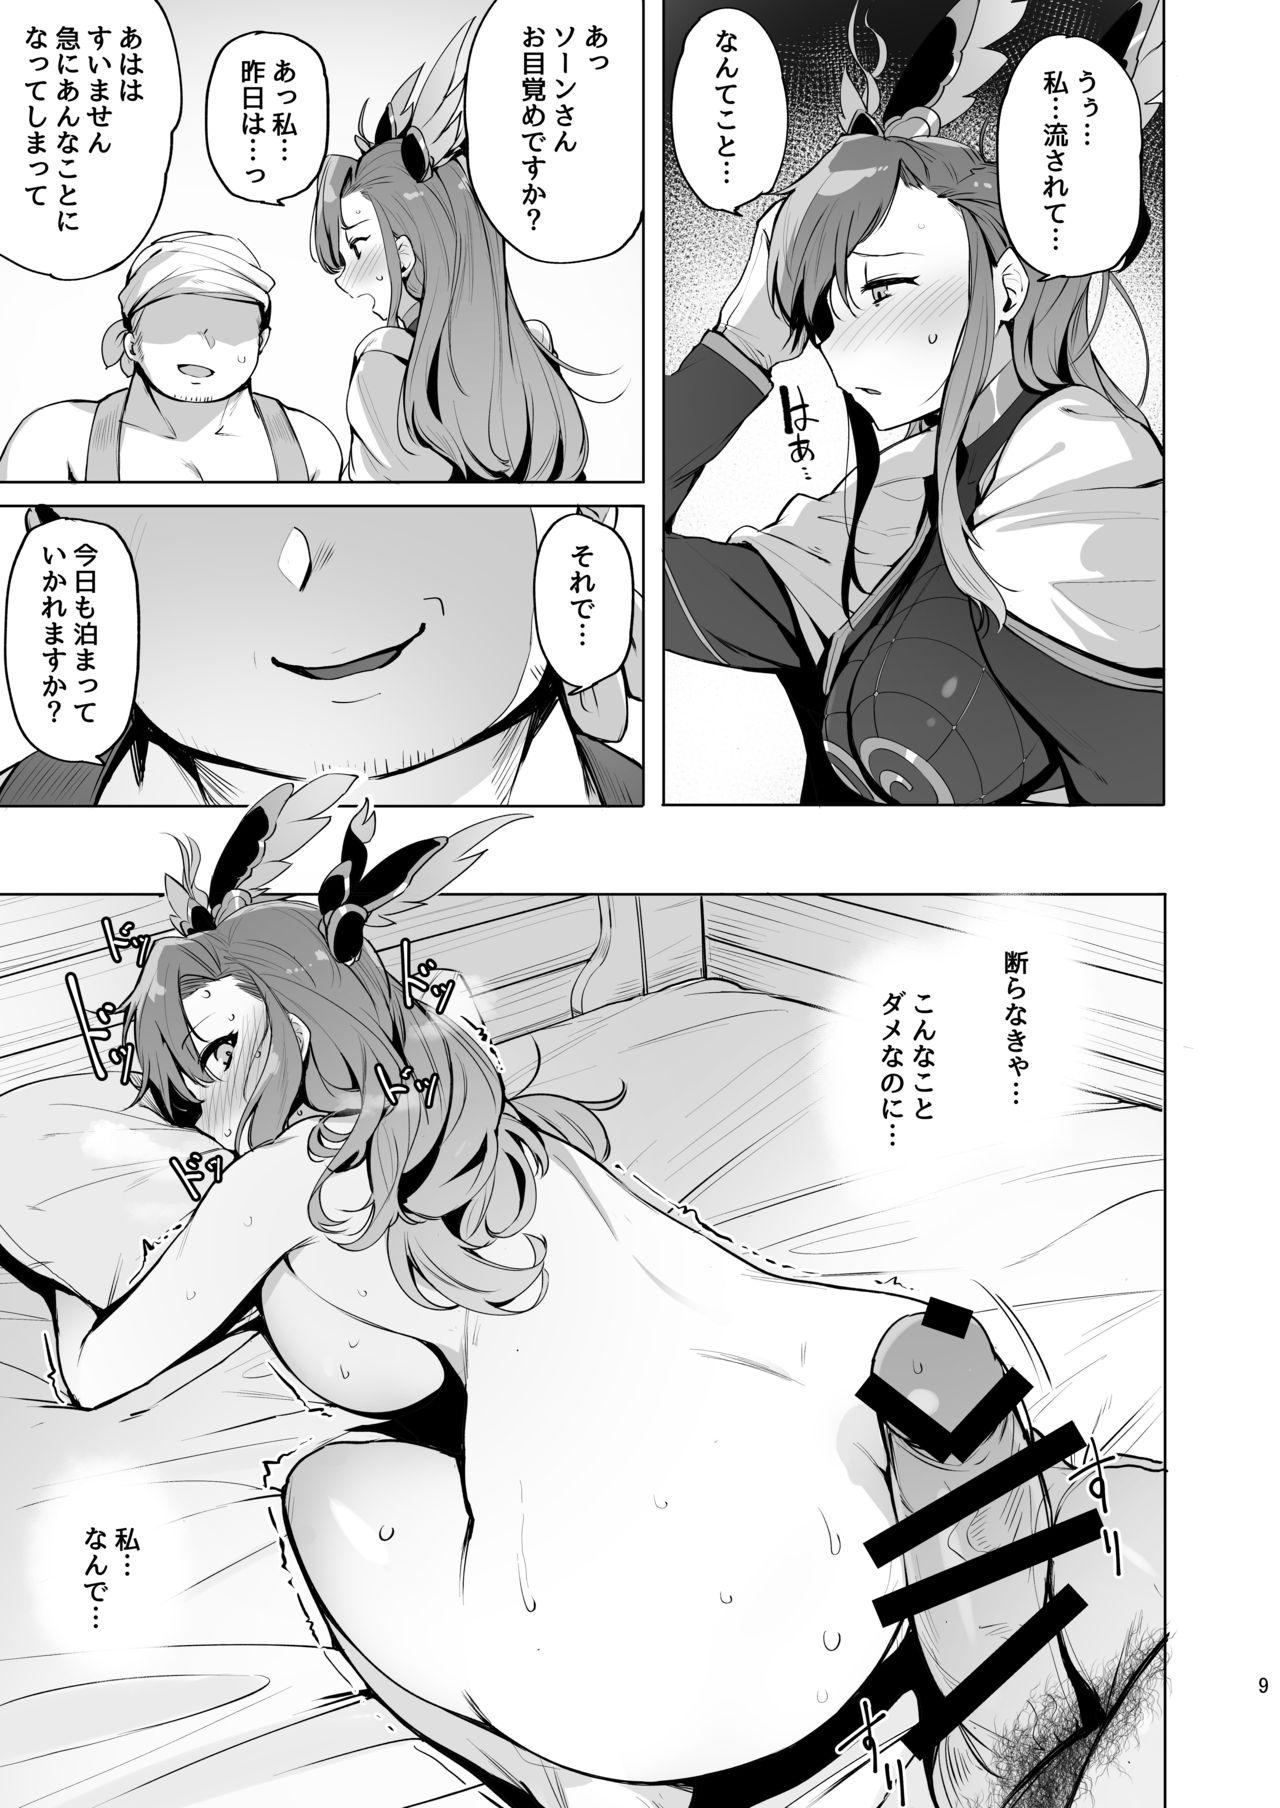 Man Deep in the eyes - Granblue fantasy Young Tits - Page 9